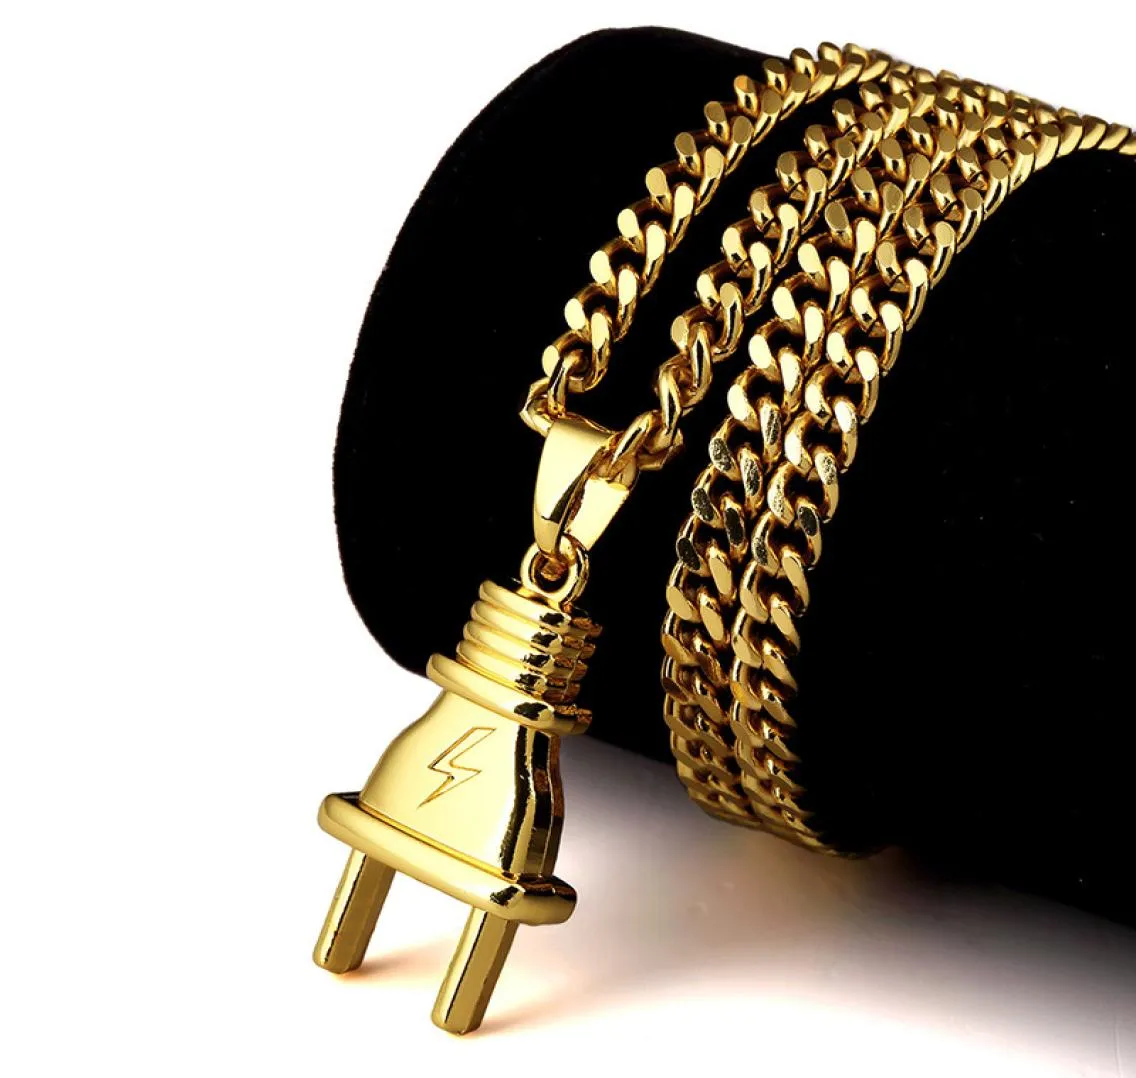 U7 NYTT Fashion Plug Pendant Necklace Rostfri Steel Black Gungold Plated Pendant Rope Chain for Menwomen Hiphop Jewelry Perfect2910021